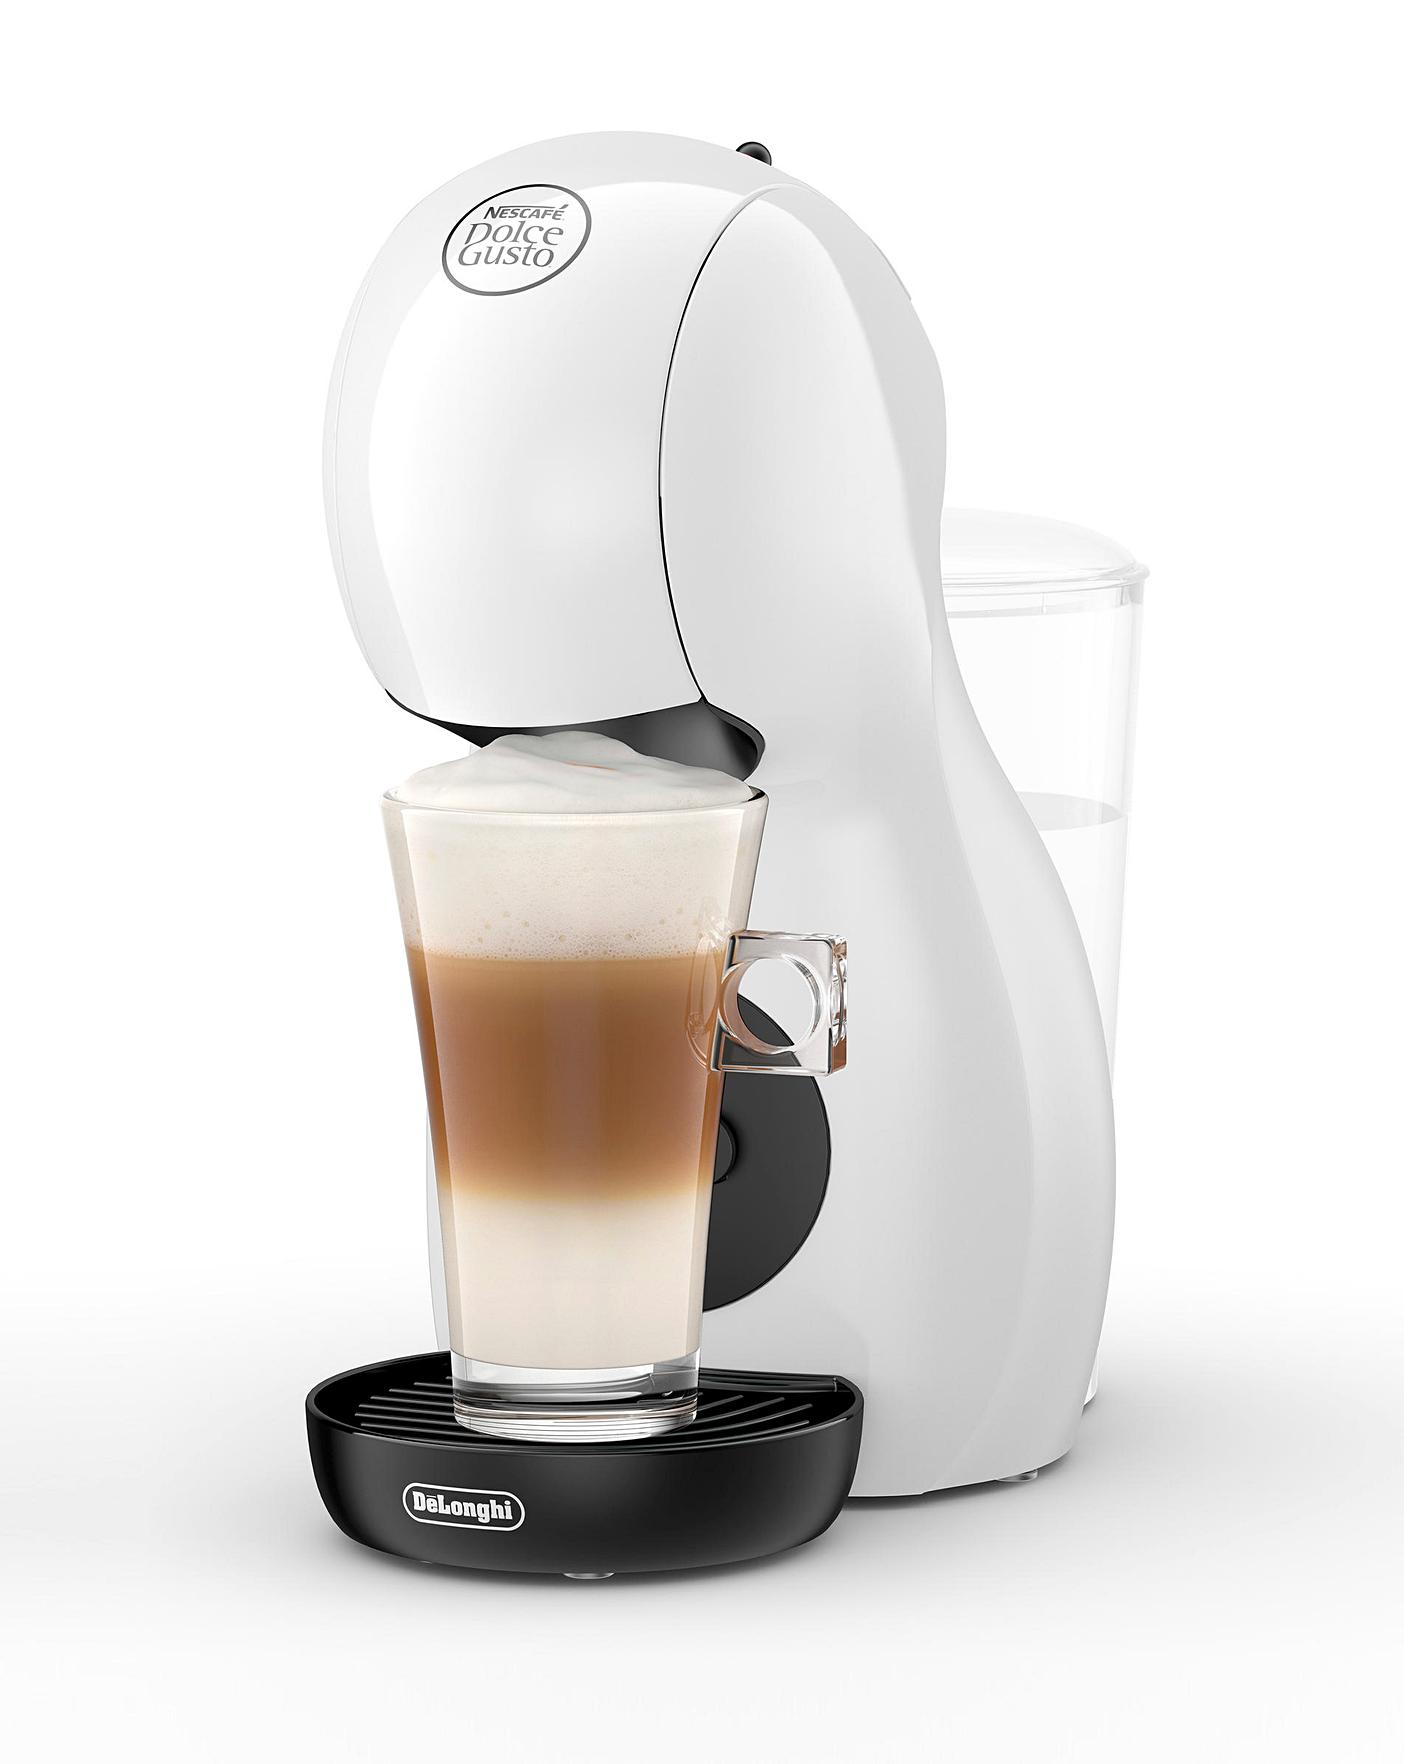 Dolce Gusto Piccolo - Exclusive Review 